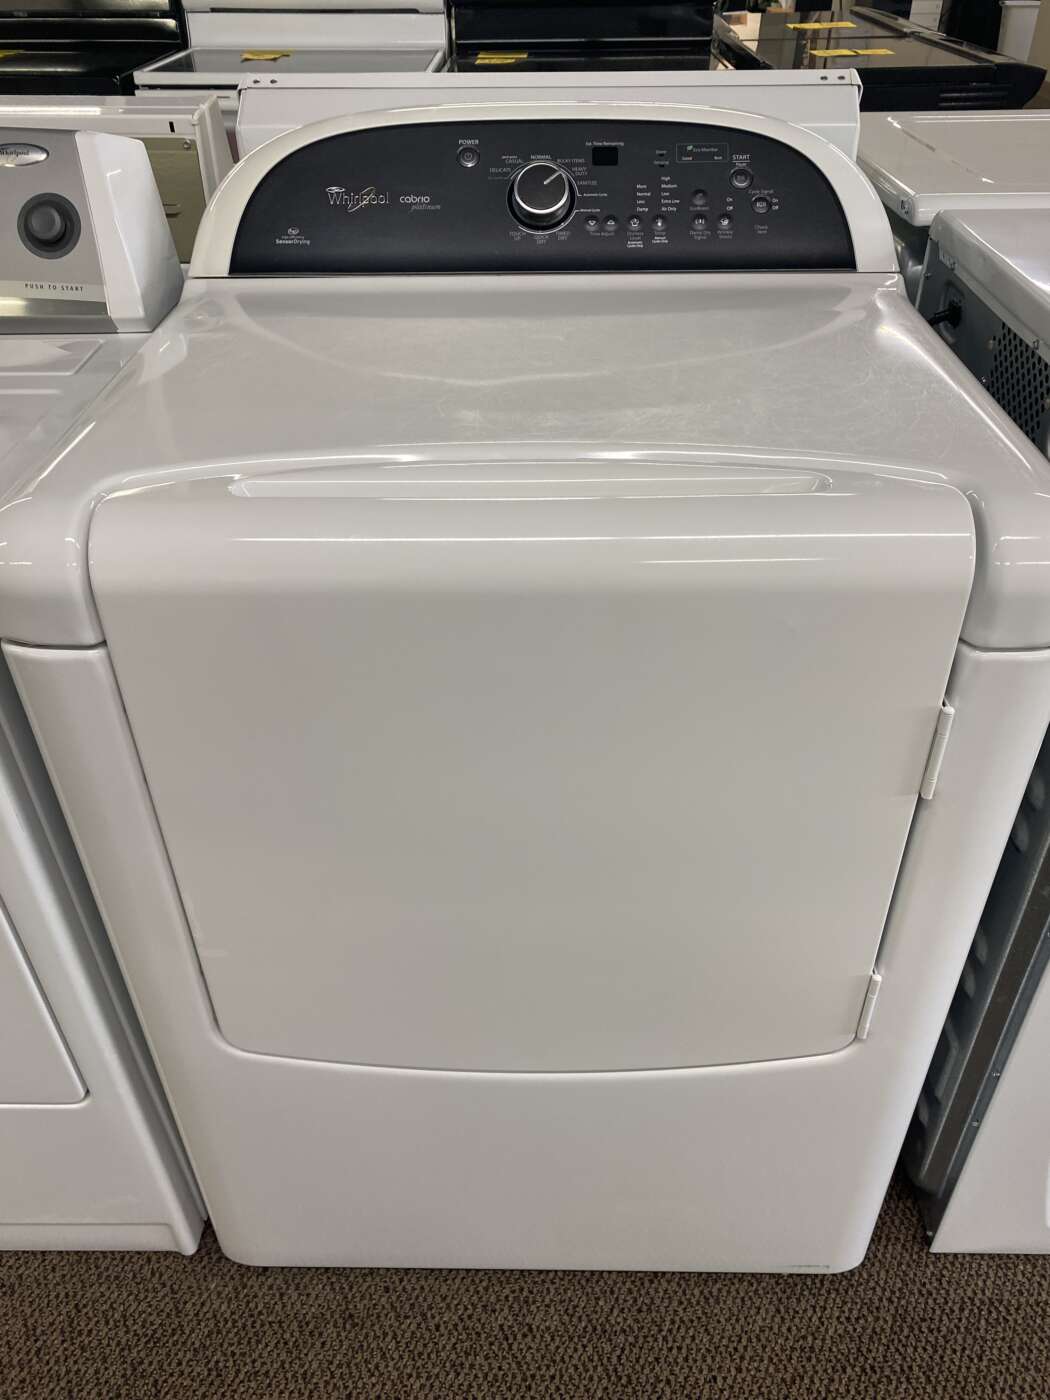 Reconditioned WHIRLPOOL 7.6 Cu. Ft. Electric Dryer